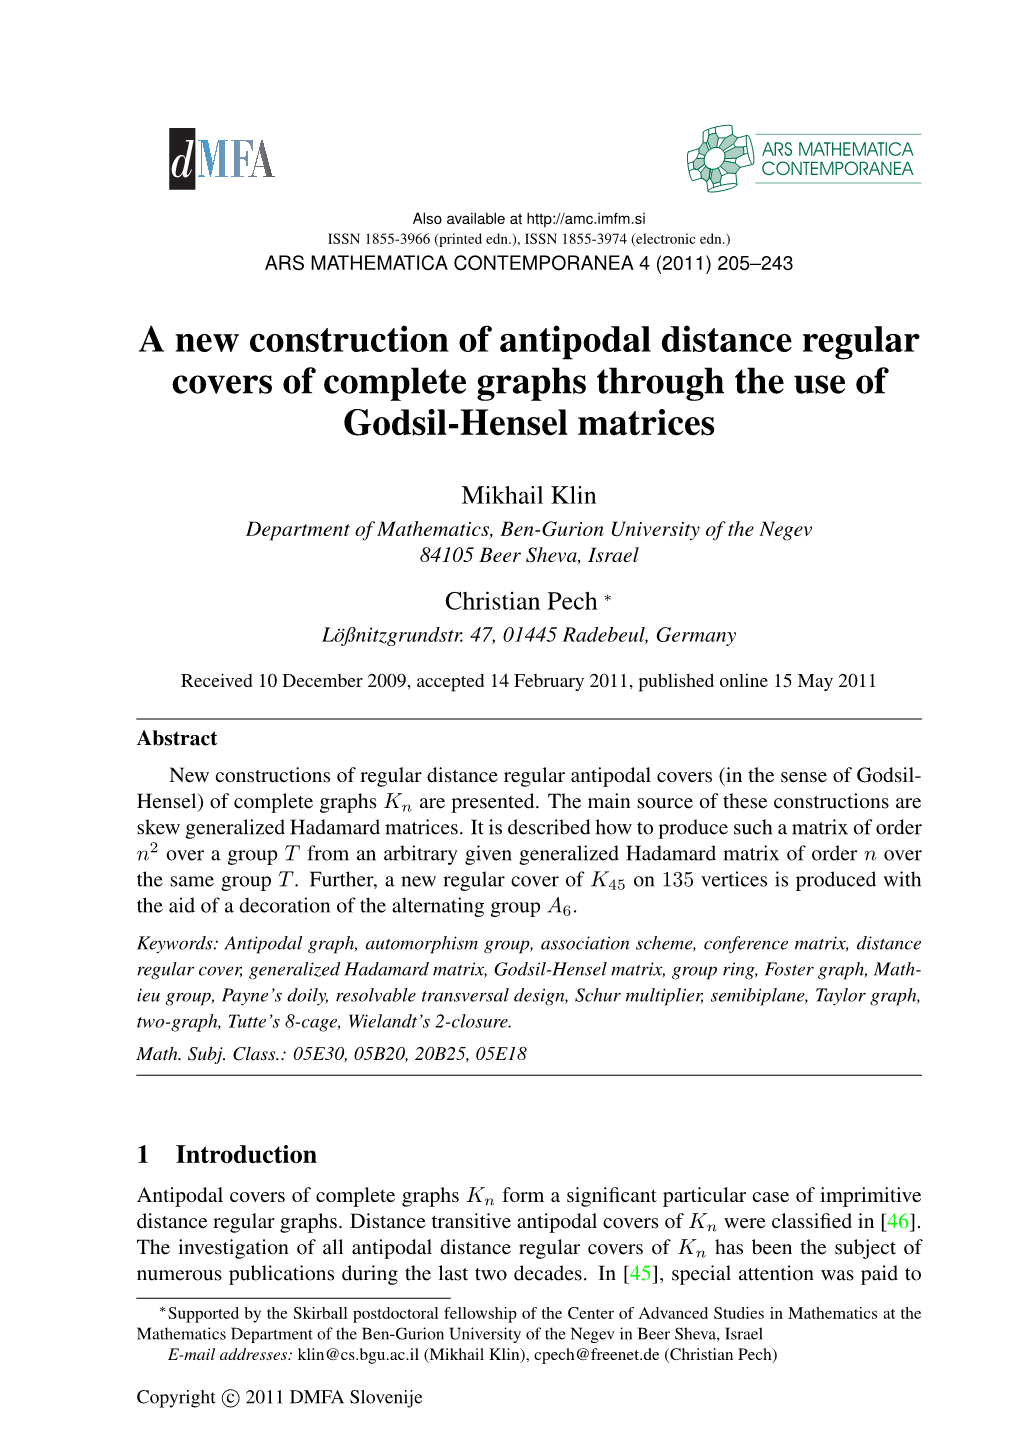 A New Construction of Antipodal Distance Regular Covers of Complete Graphs Through the Use of Godsil-Hensel Matrices